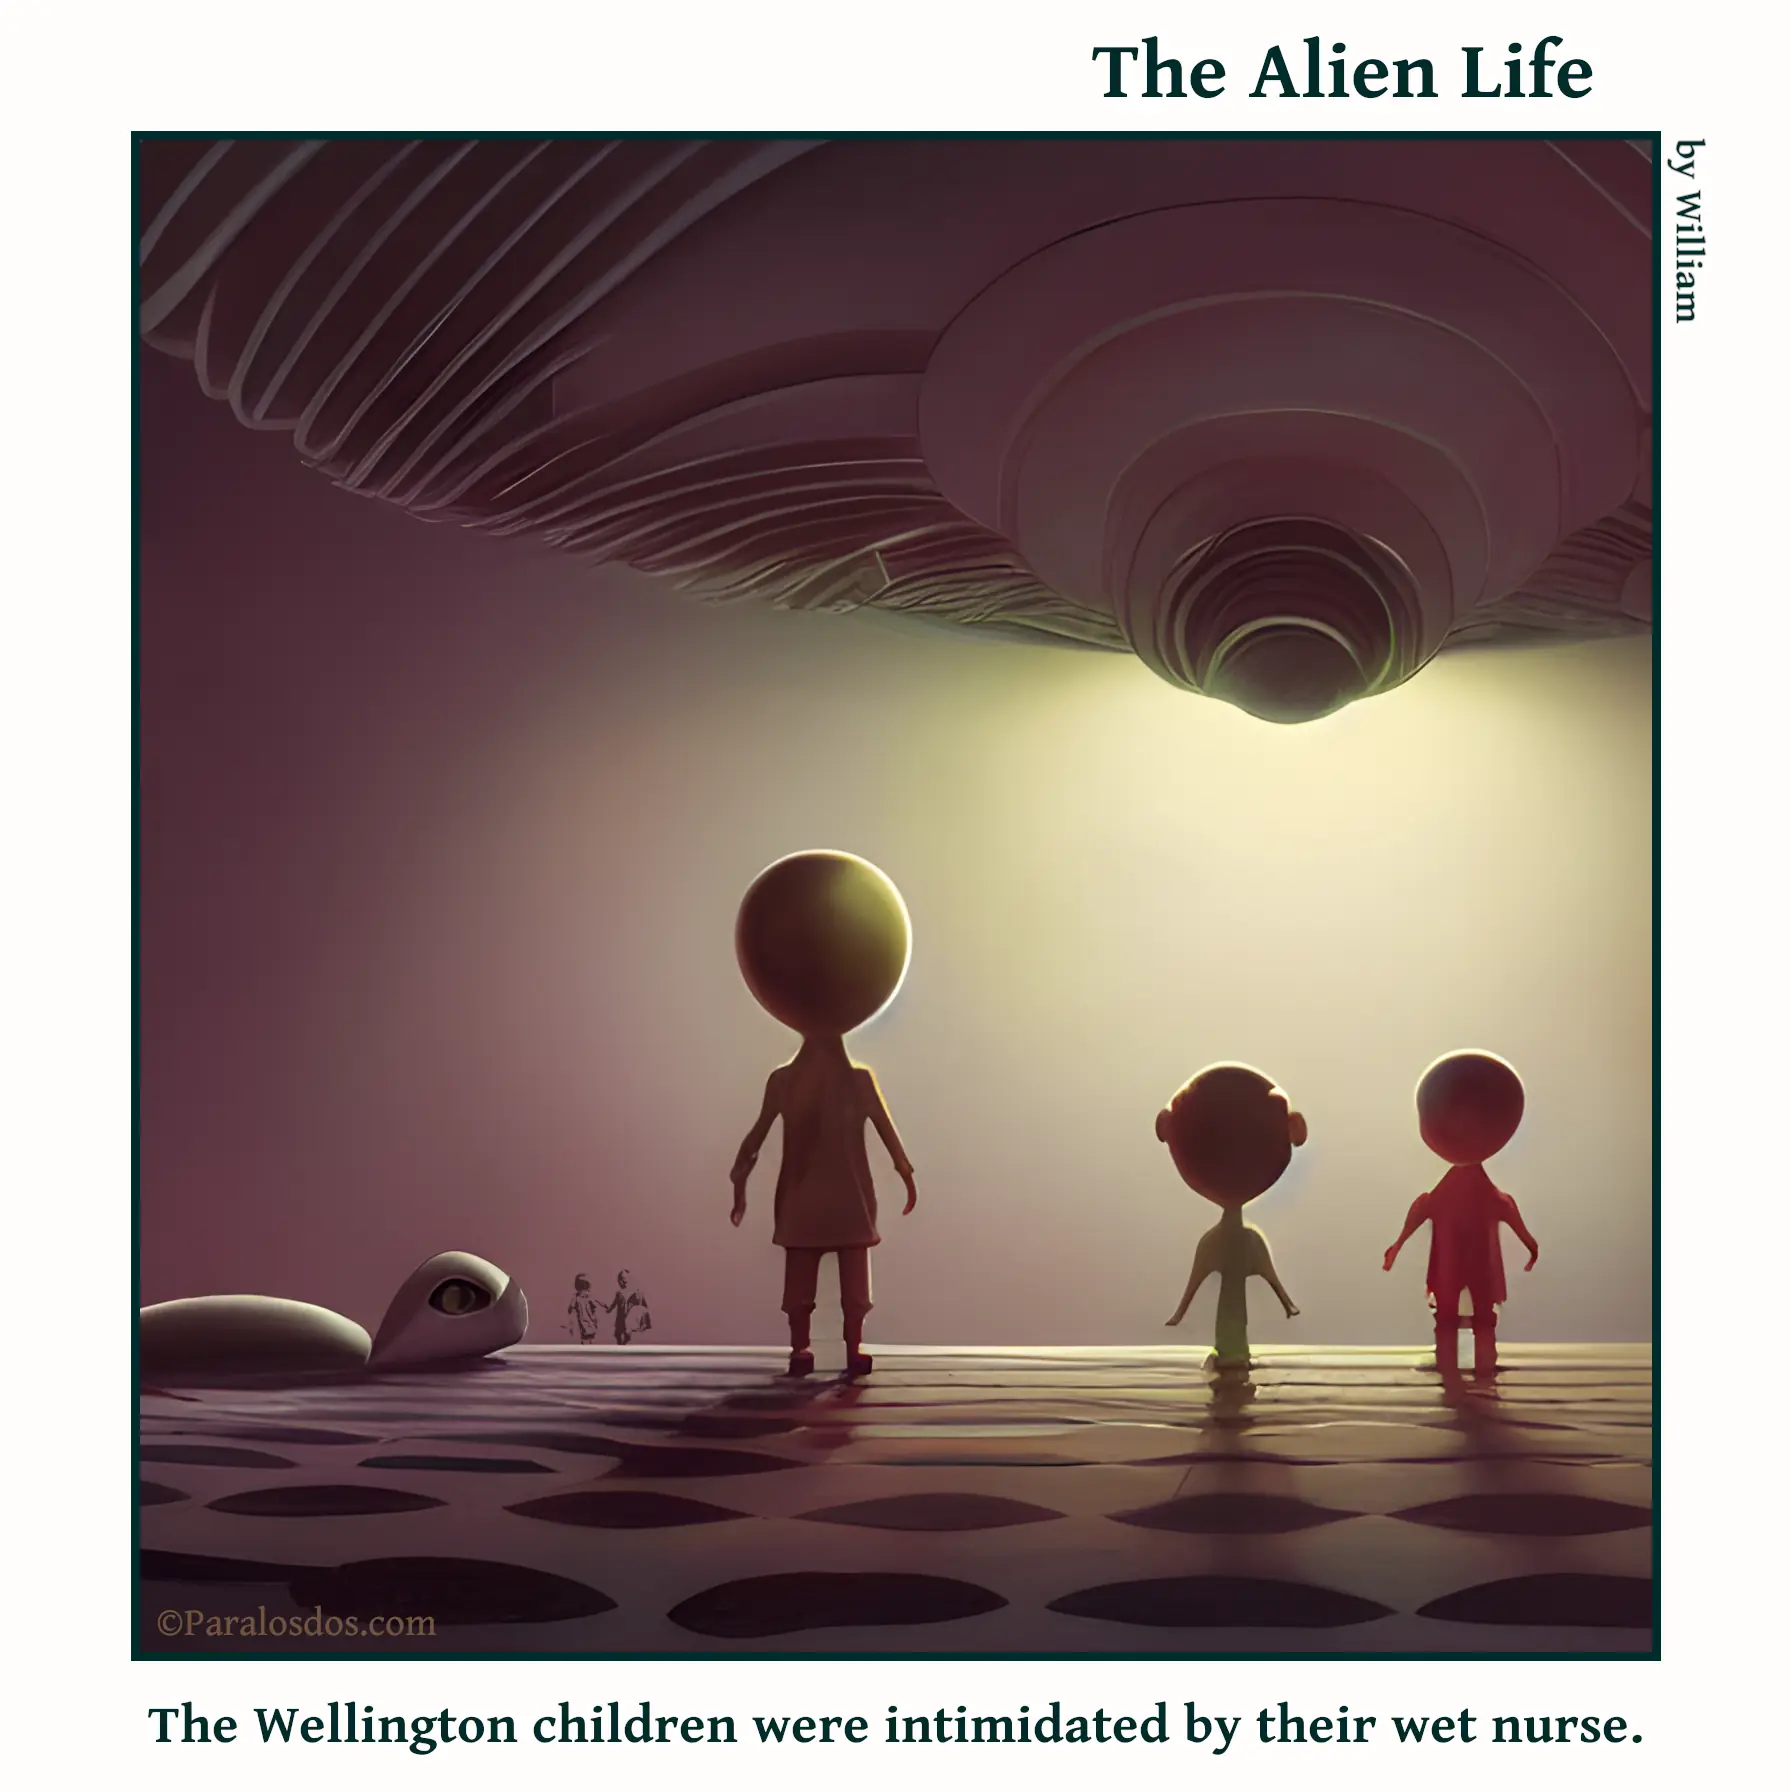 The Alien Life, one panel Comic. An adult and two alien children are standing on a platform. Above them and to the right is a giant metallic object that looks like a breast. The caption reads: The Wellington children were intimidated by their wet nurse.